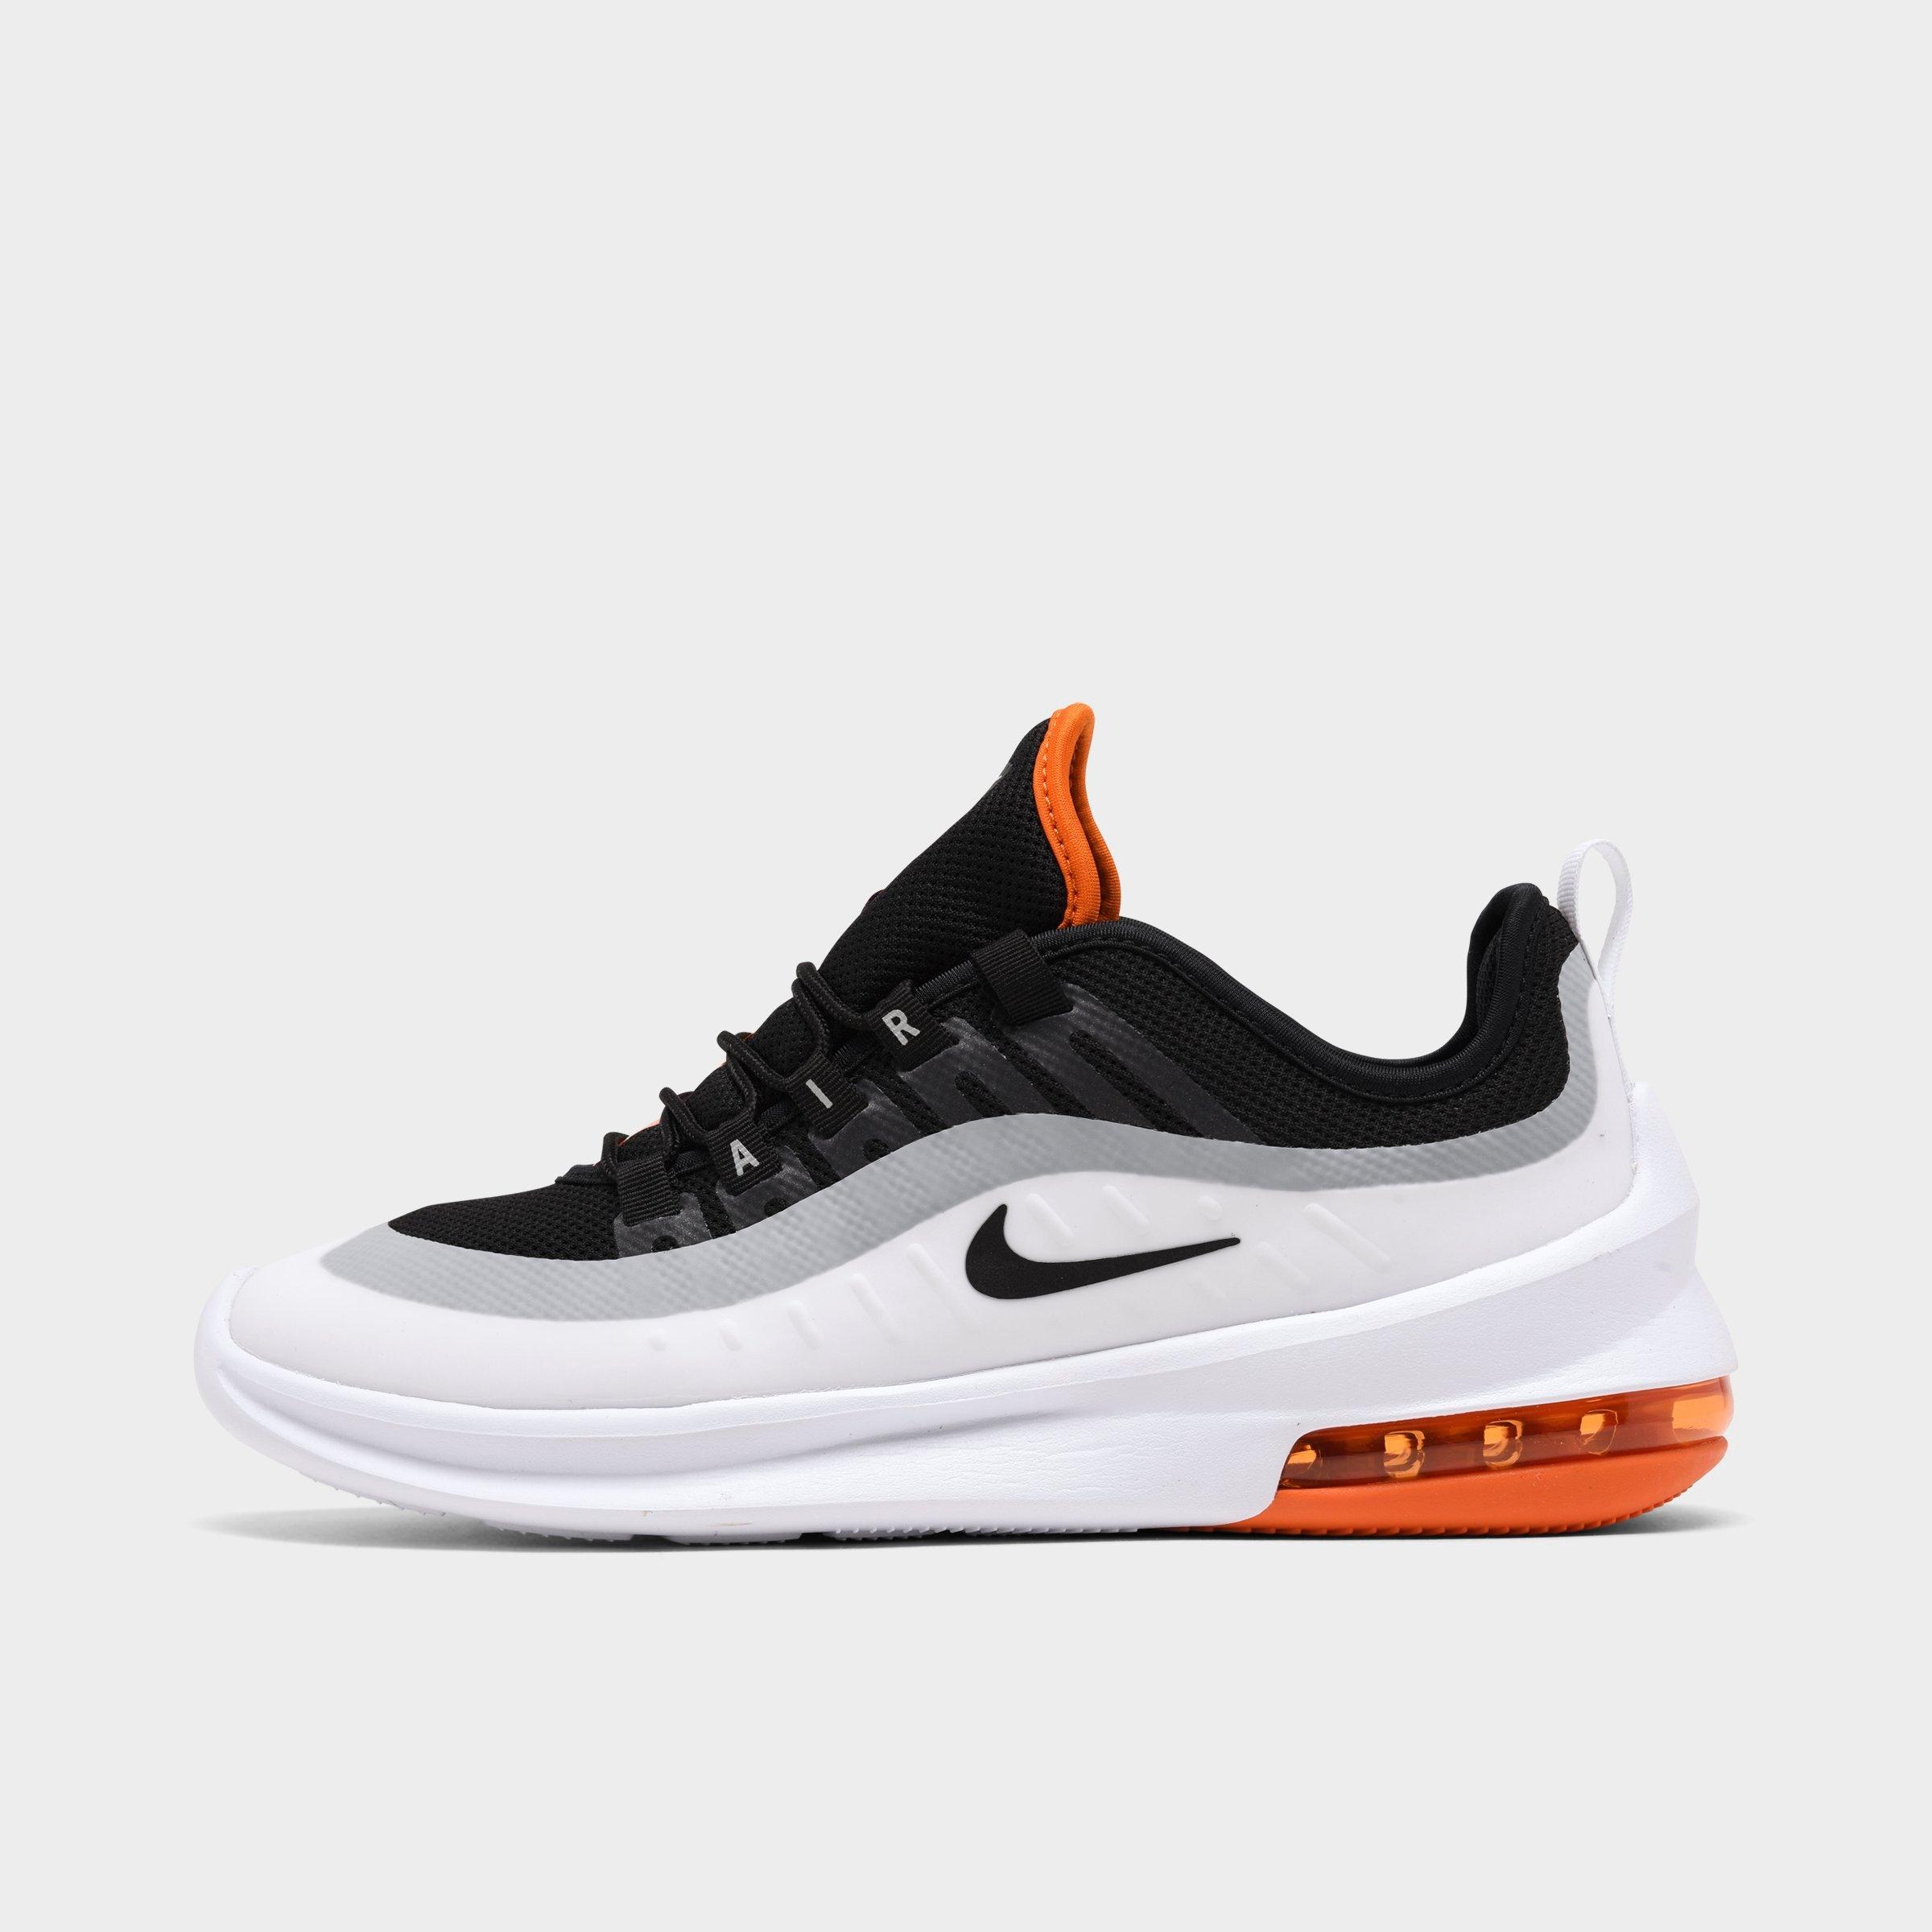 nike women's air max axis casual sneakers from finish line